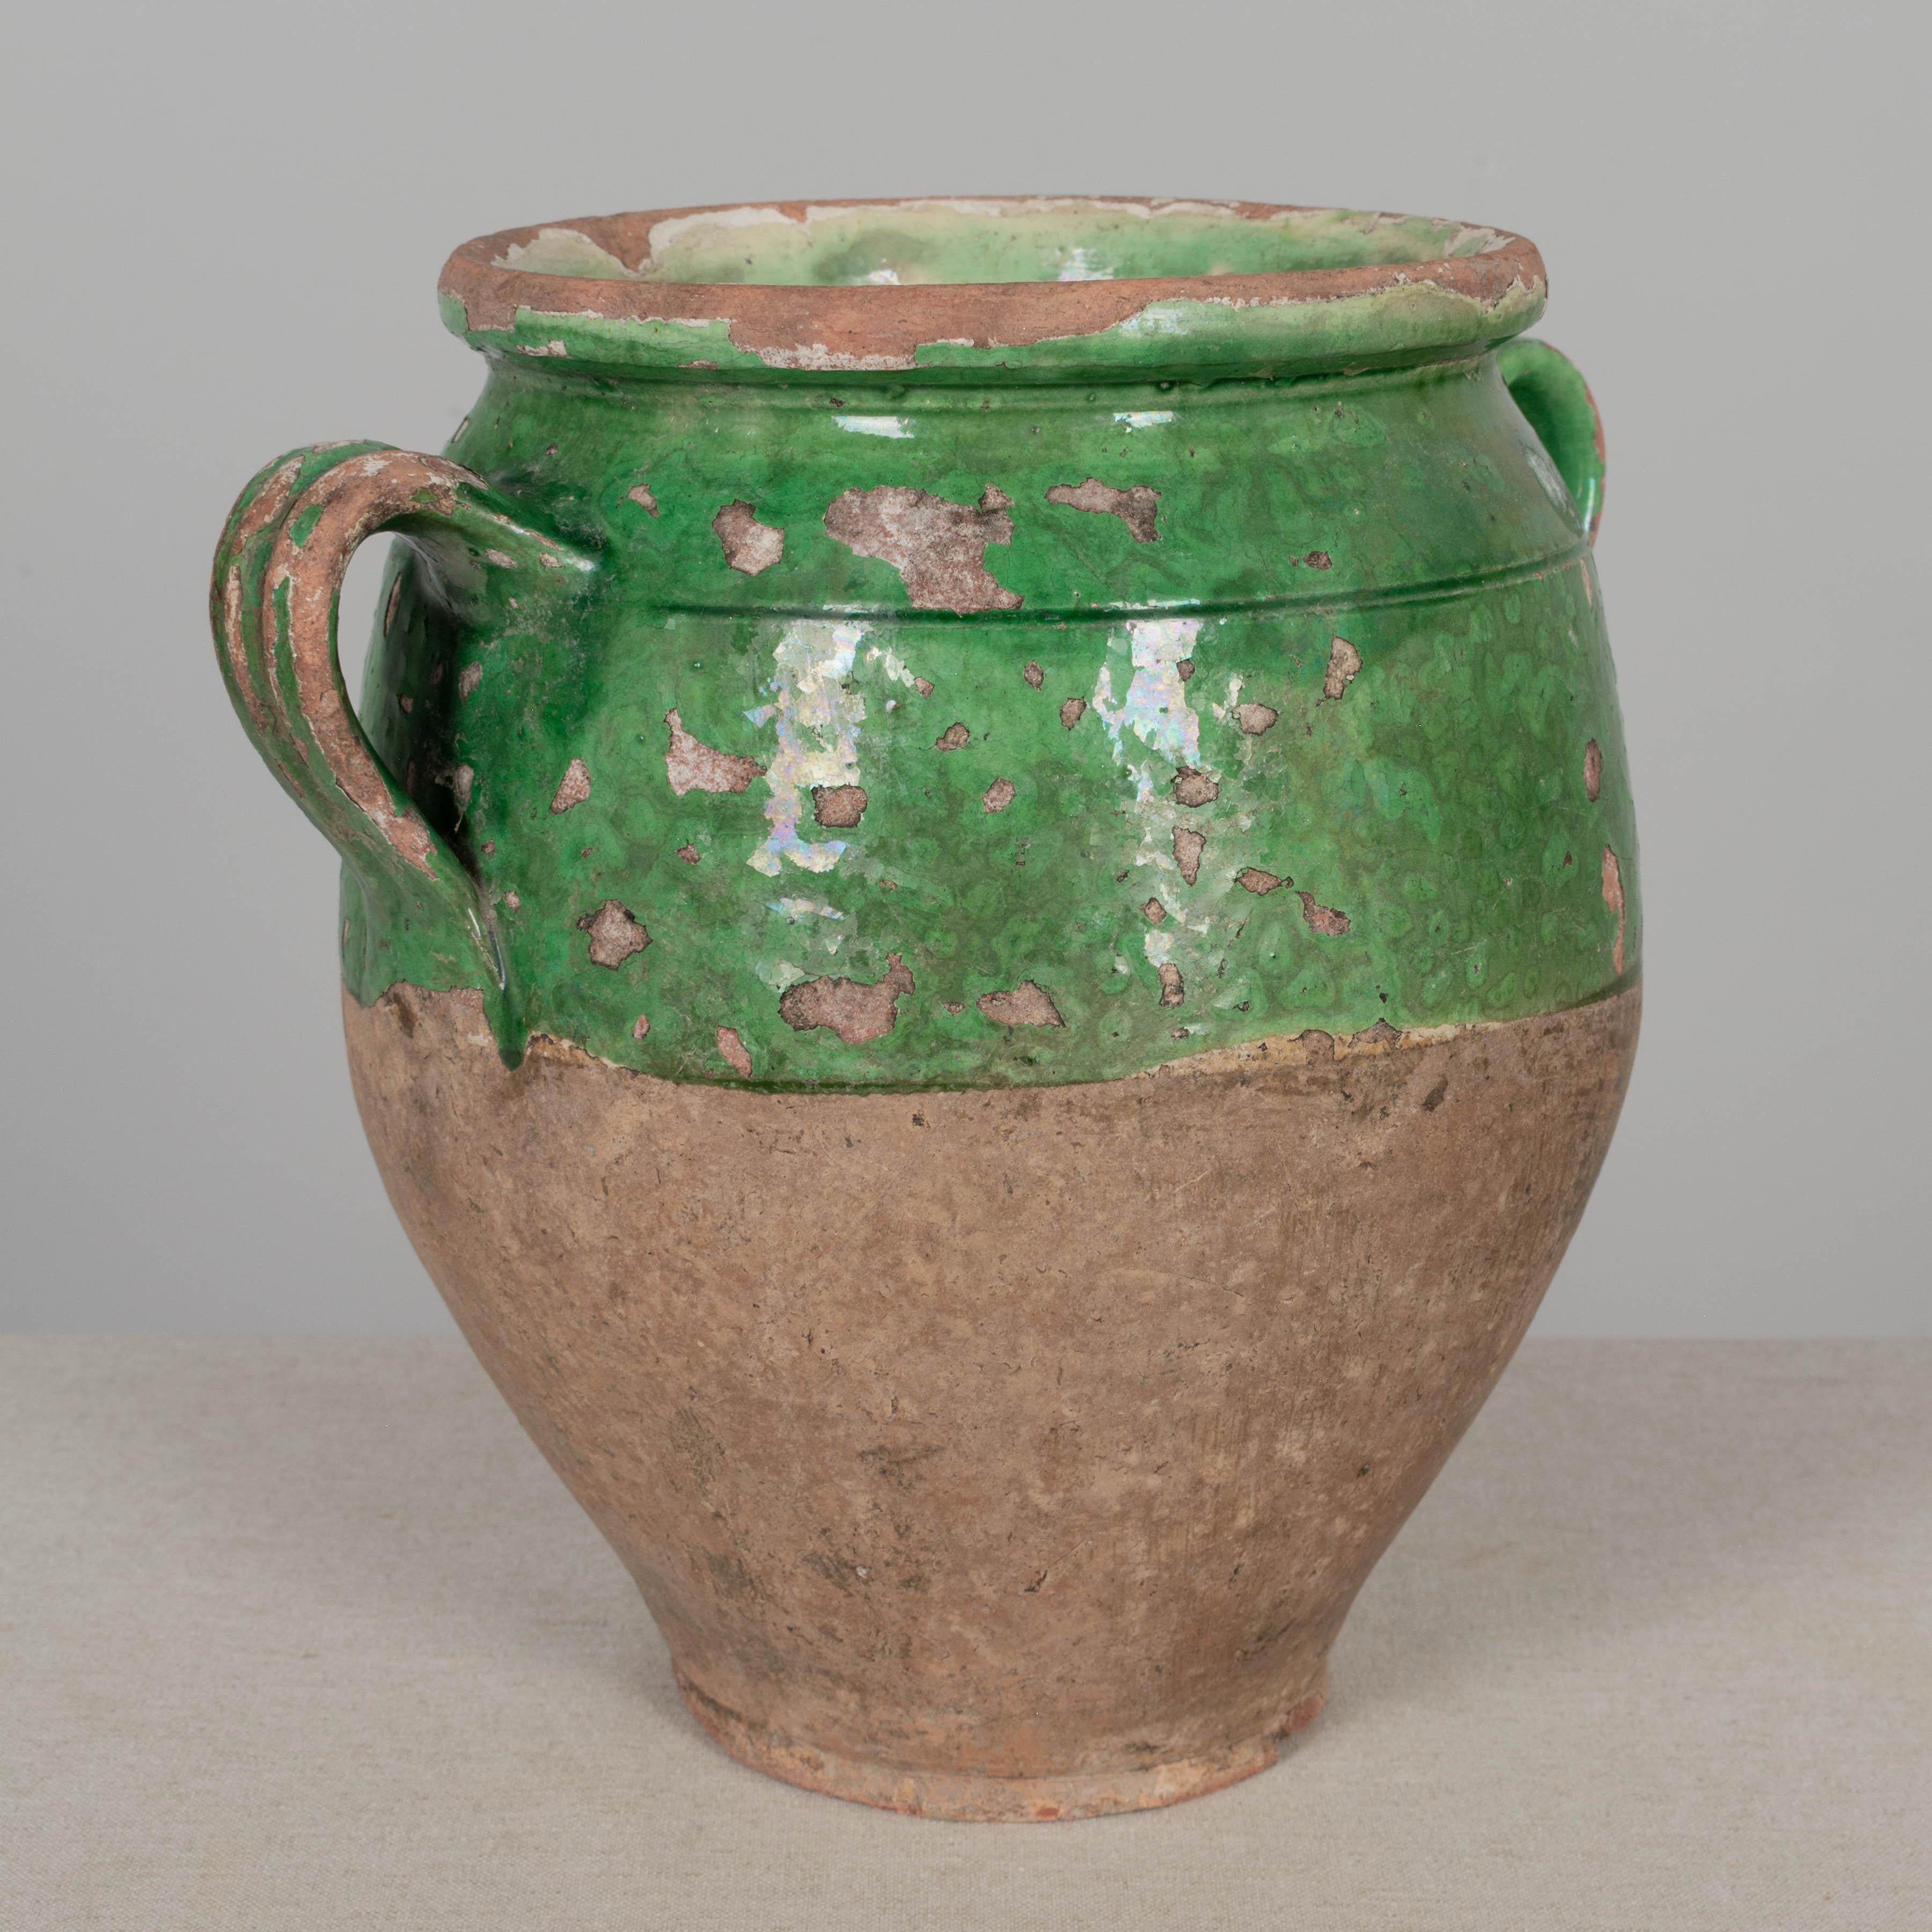 19th Century French Terracotta Confit Pot For Sale 3